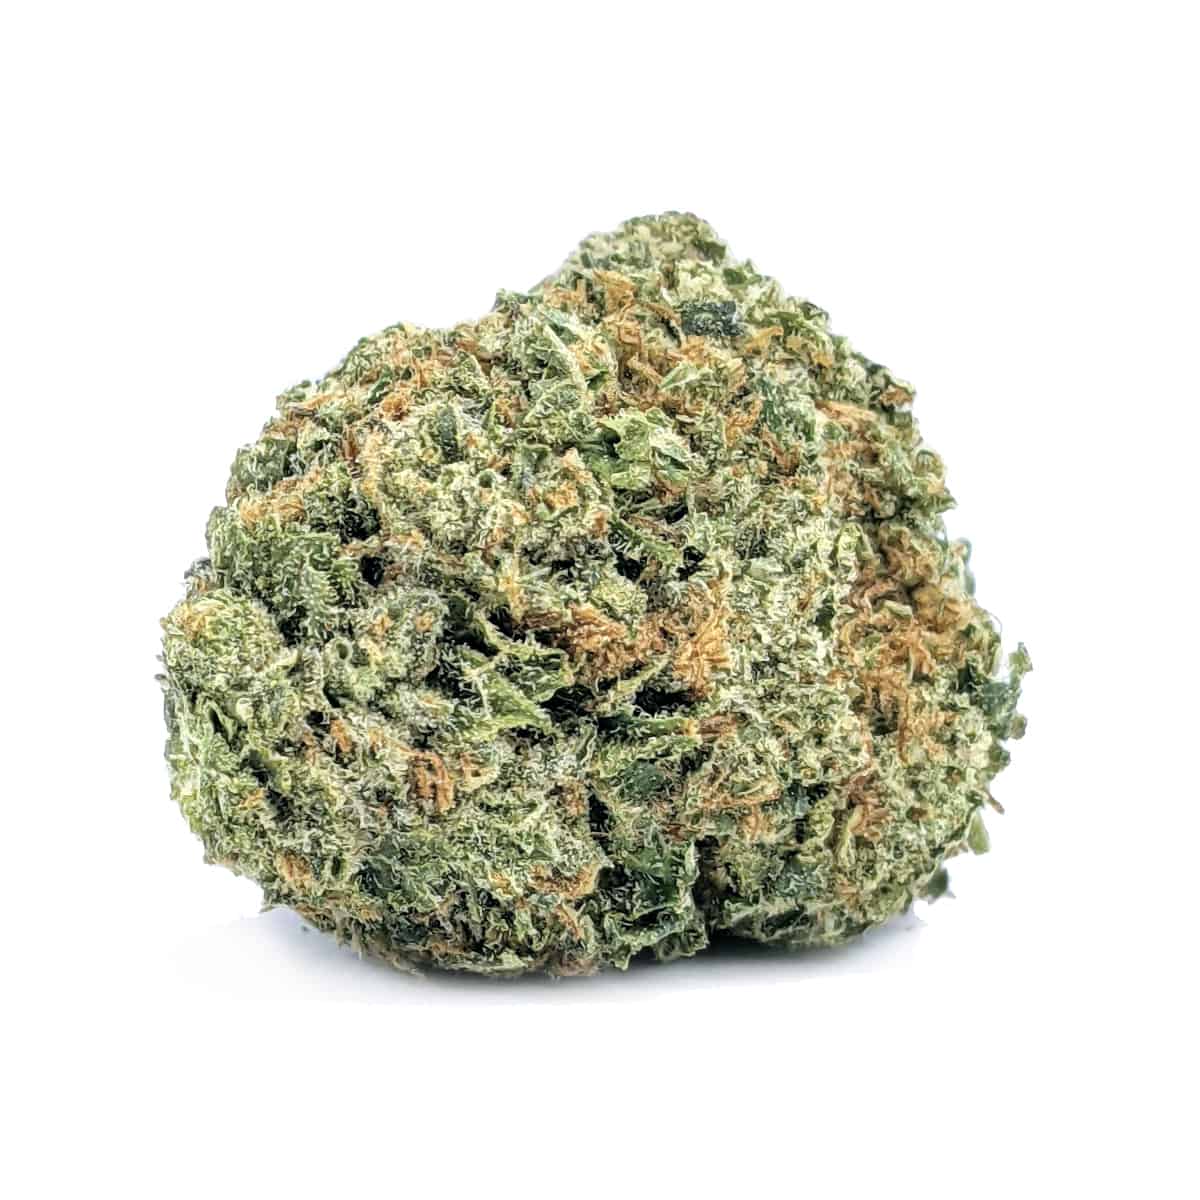 Budget Buds - 9 Pound Hammer | Buy Weed Online | Online Dispensary